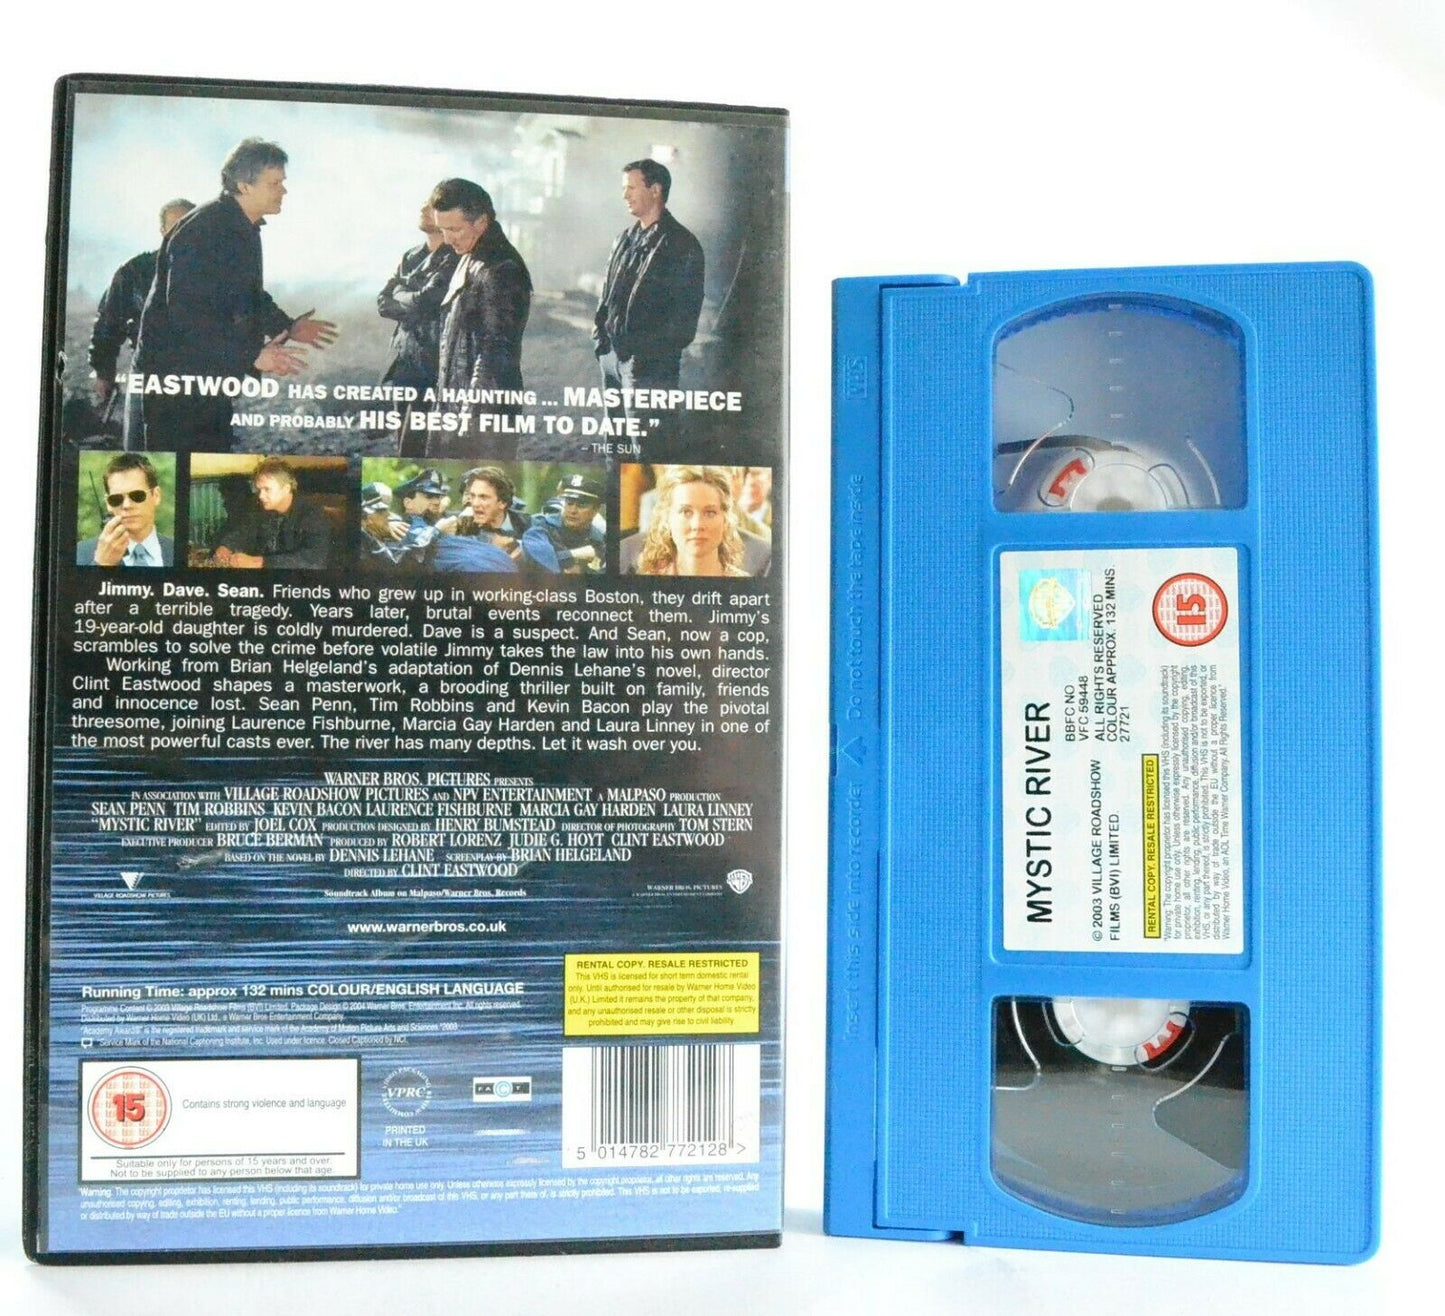 Mystic River: Film By C.Eastwood (1993) - Thriller - Large Box - S.Penn - VHS-